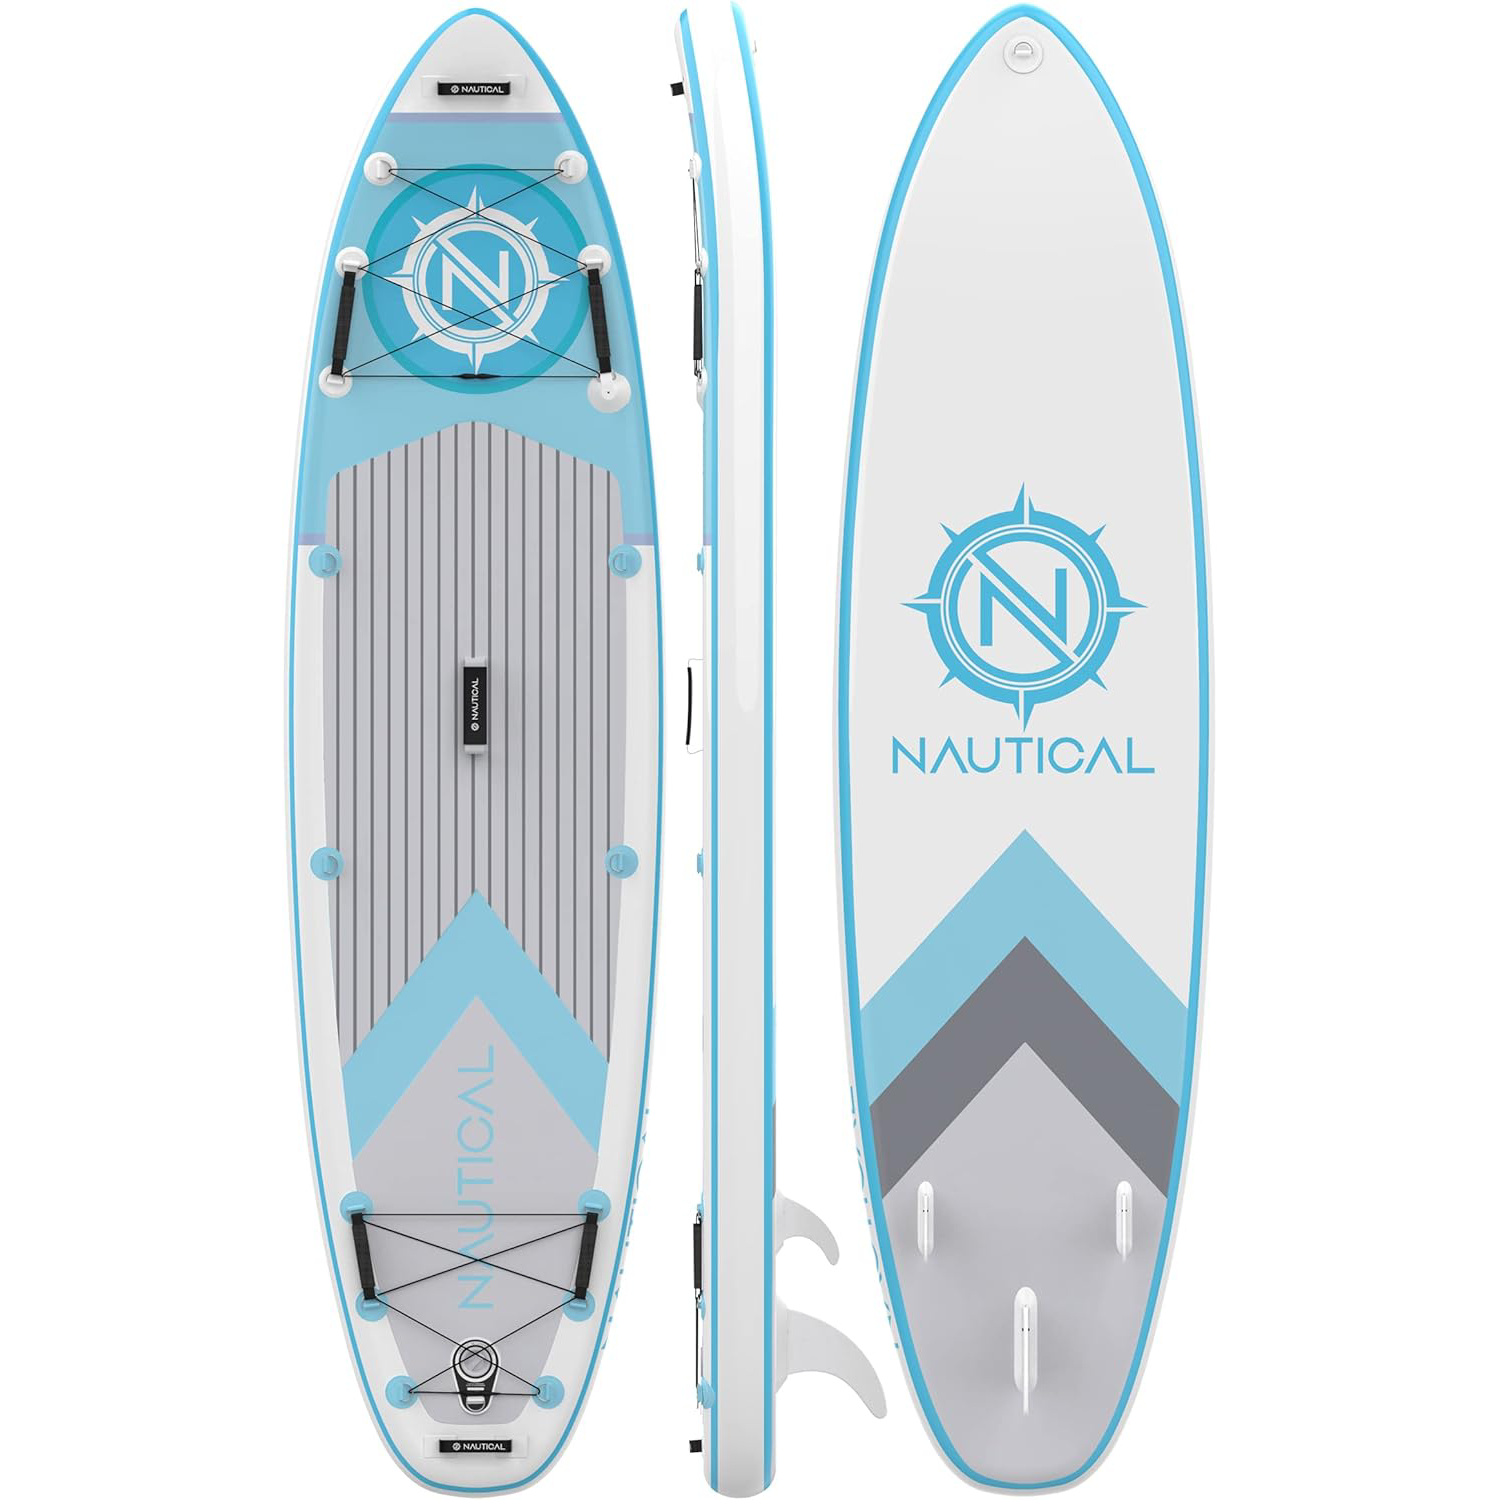 iROCKER Nautical Inflatable Stand Up Paddle Board